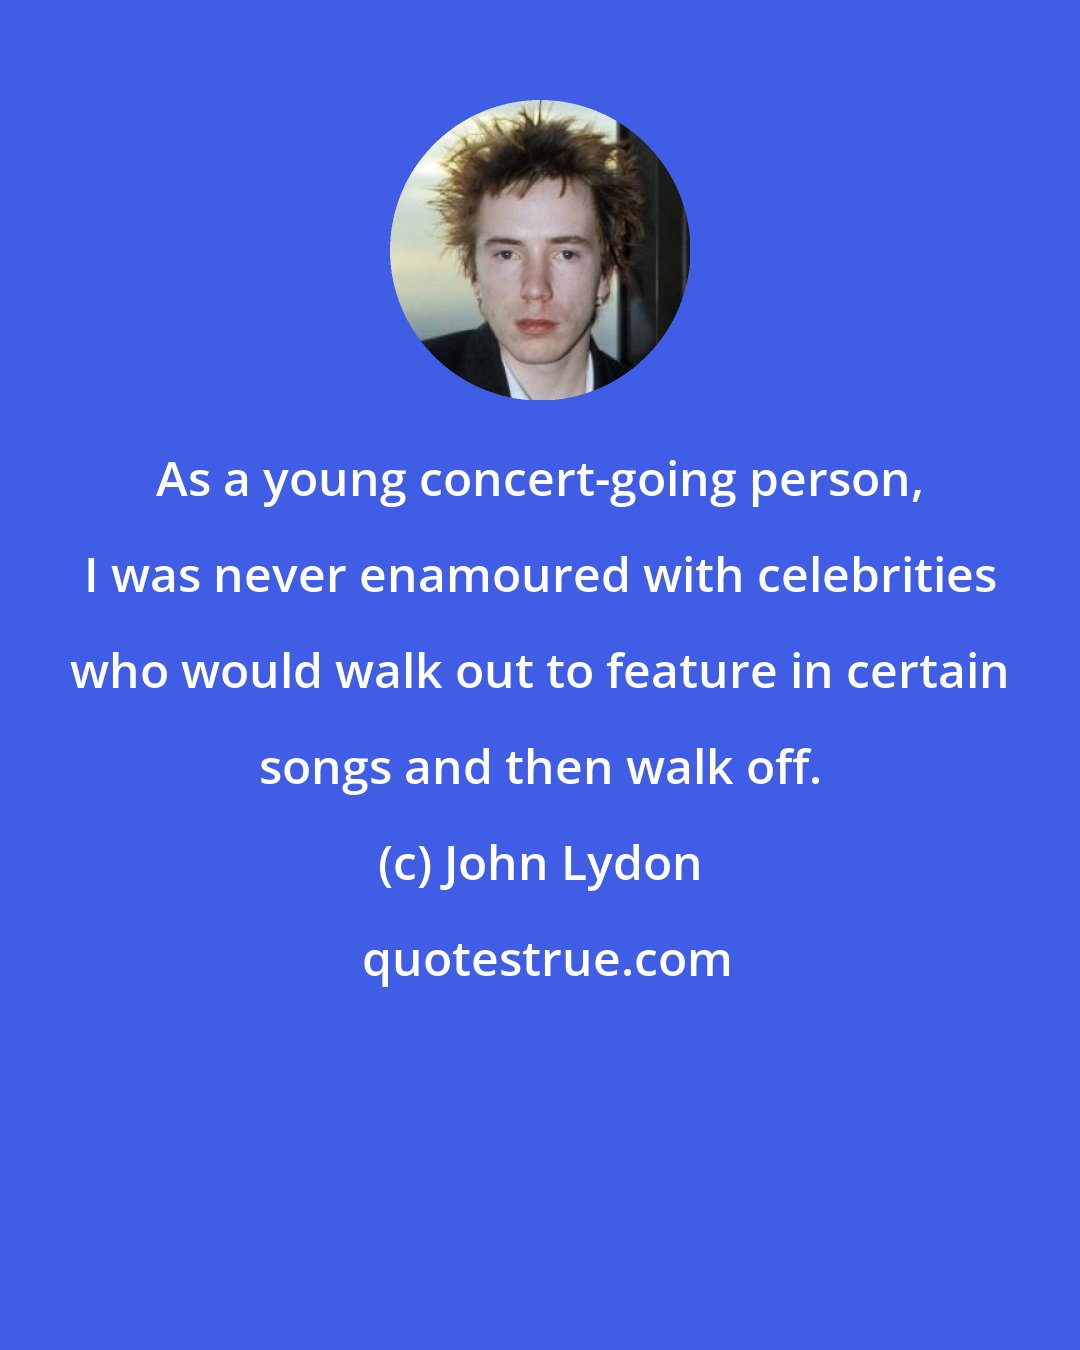 John Lydon: As a young concert-going person, I was never enamoured with celebrities who would walk out to feature in certain songs and then walk off.